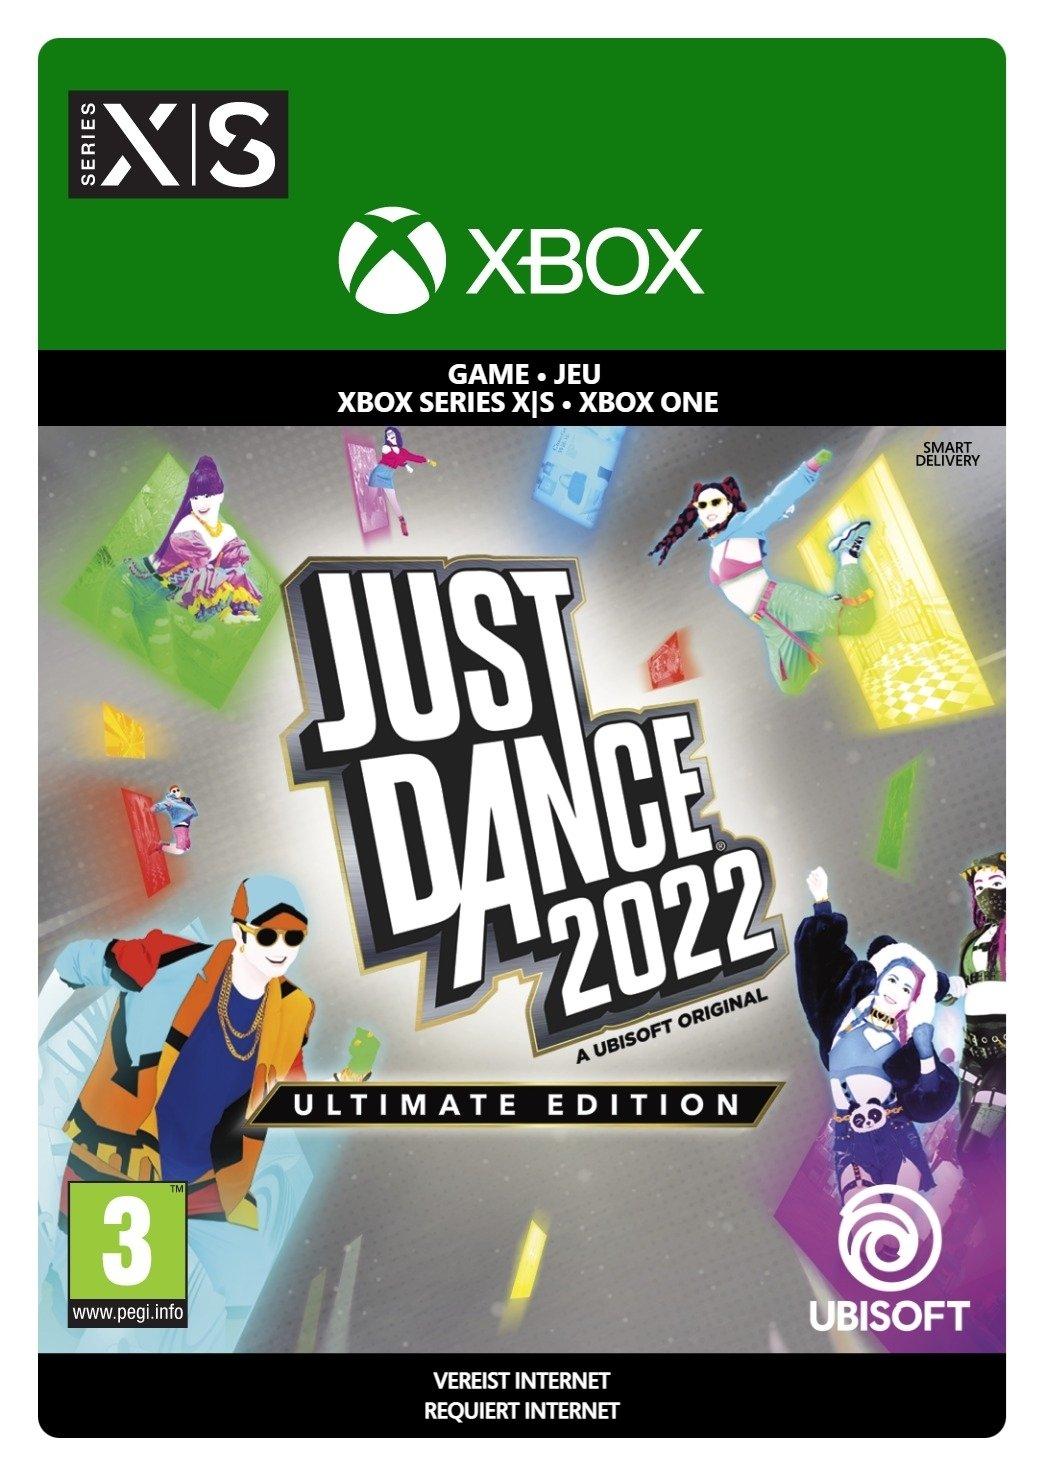 Just Dance 2022 Ultimate Edition - Xbox Series X/Xbox One - Game | G3Q-01285 (c3929df5-8890-3749-b9bf-792263328fb6)